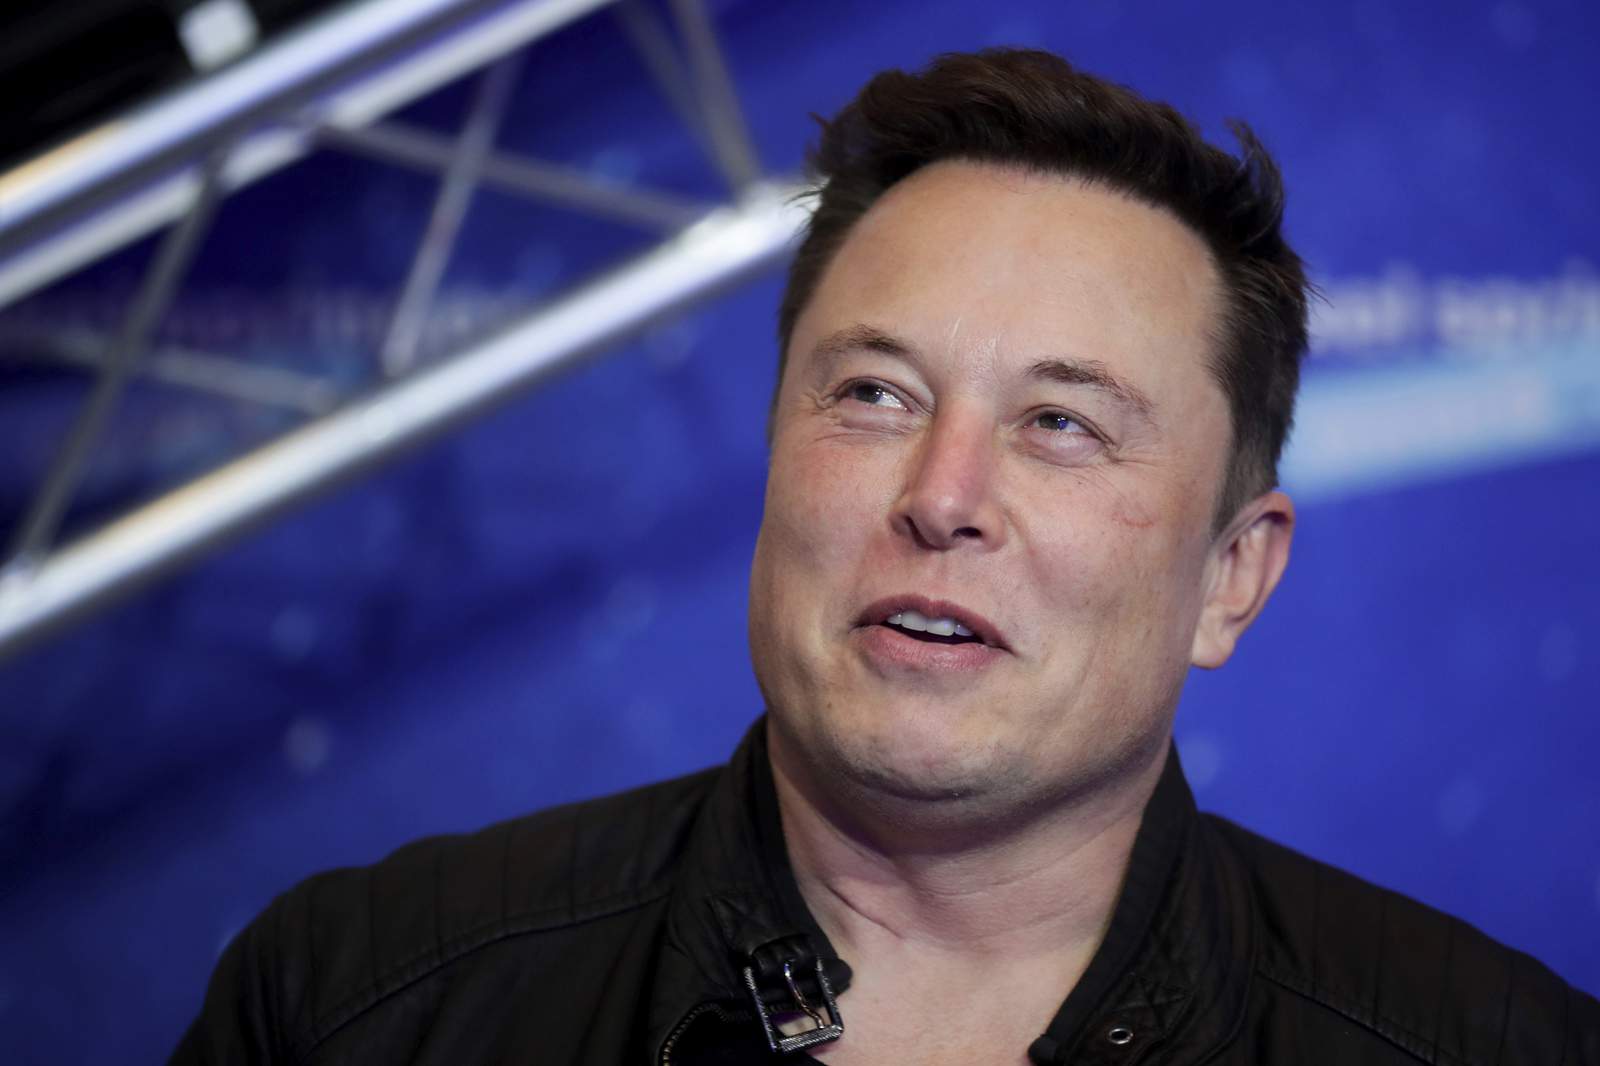 Tesla to hire ‘specialists’ to ‘address social media escalations’ directed at CEO Elon Musk